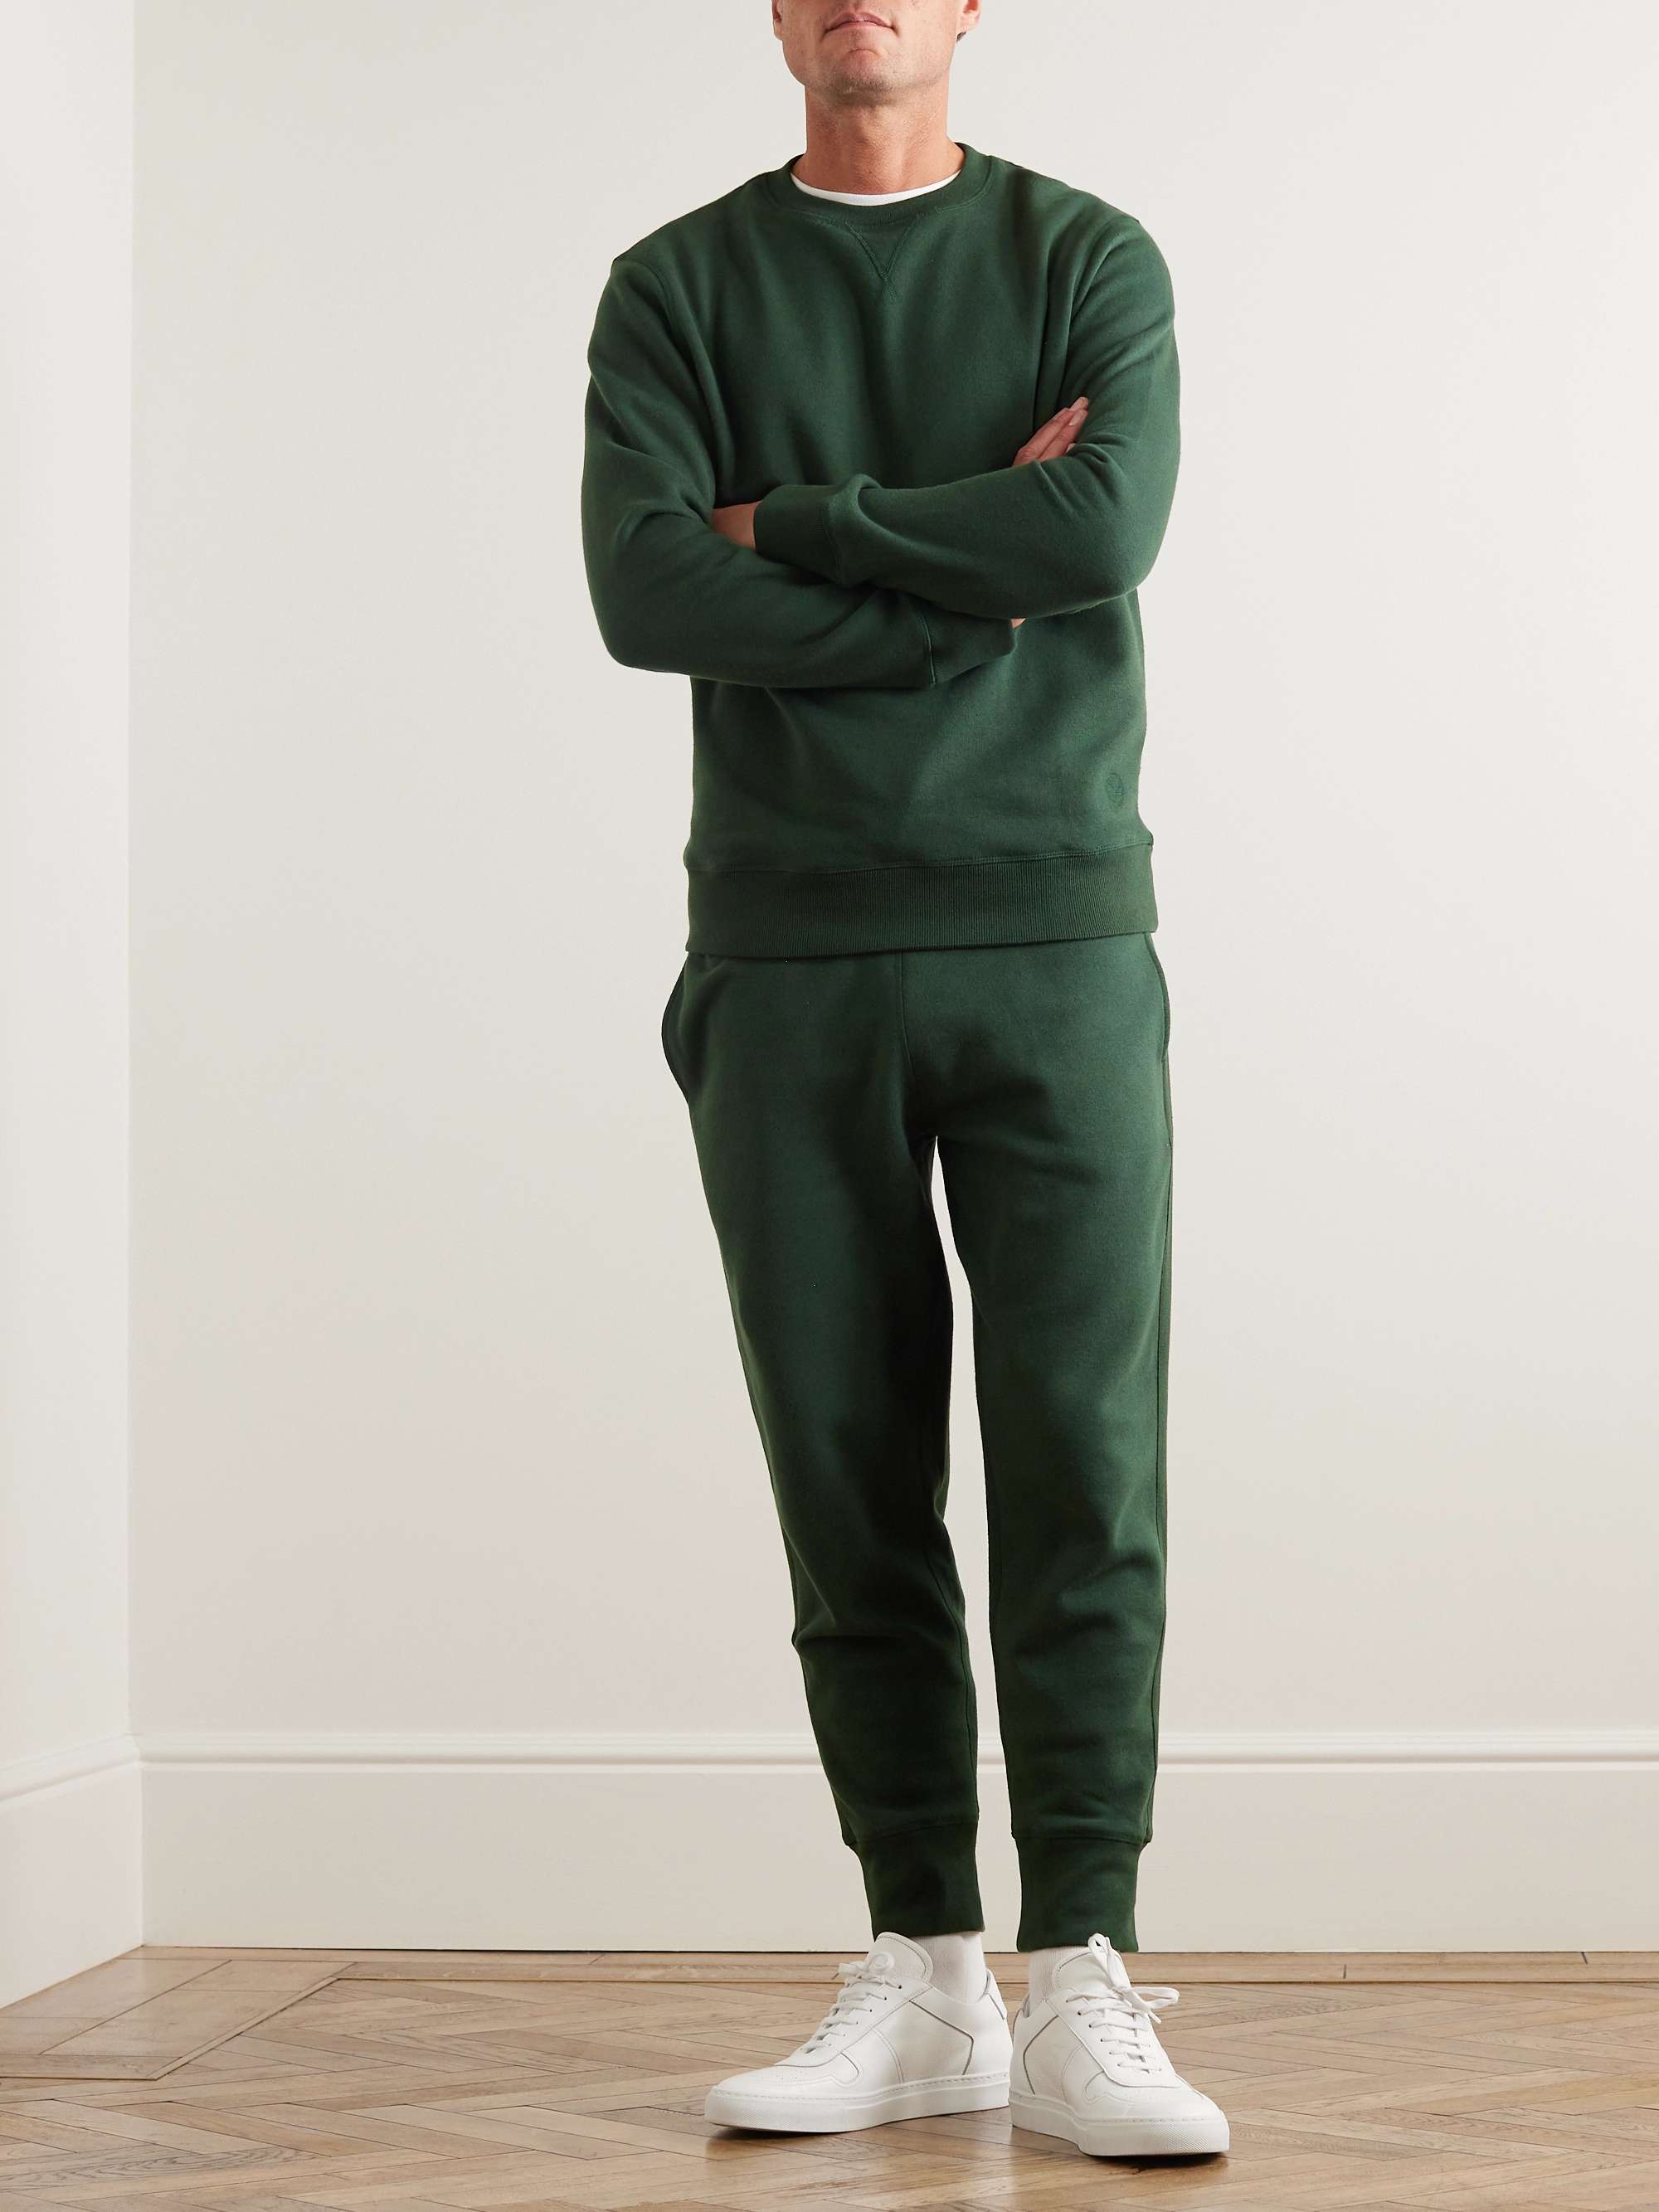 KINGSMAN Tapered Cotton and Cashmere-Blend Jersey Sweatpants